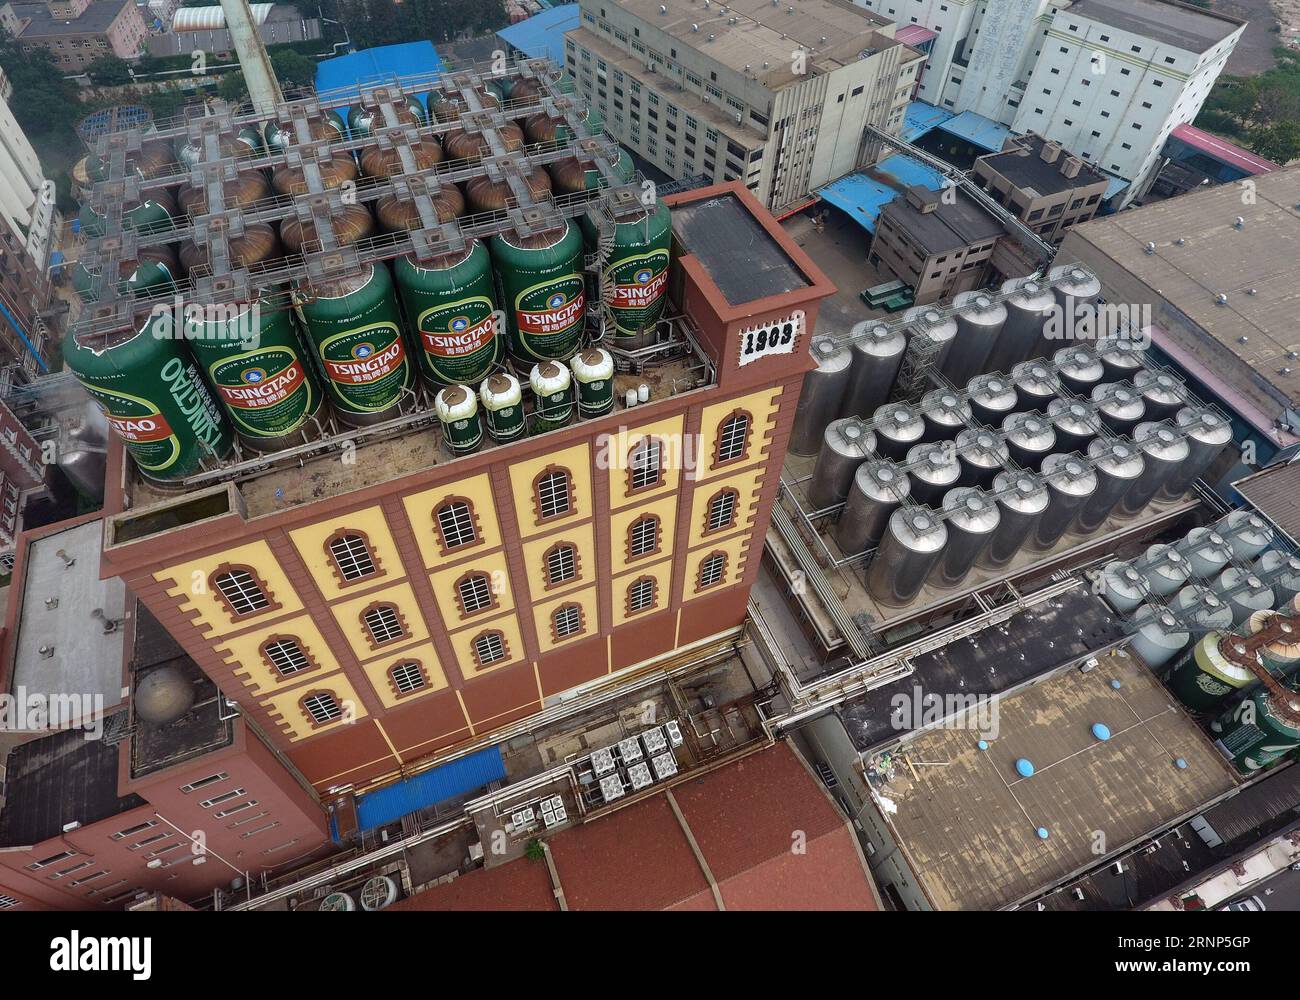 170811 -- QINGDAO, Aug. 11, 2017 -- Aerial photo taken on Aug. 10, 2017 shows the bird s eye view of Tsingtao Brewery in Qingdao, east China s Shandong Province. A group of photos taken by drones show landmarks of the city, reflecting the development of the costal city in recent years.  lb CHINA-SHANDONG-QINGDAO-AERIAL VIEW CN ZhuxZheng PUBLICATIONxNOTxINxCHN Stock Photo